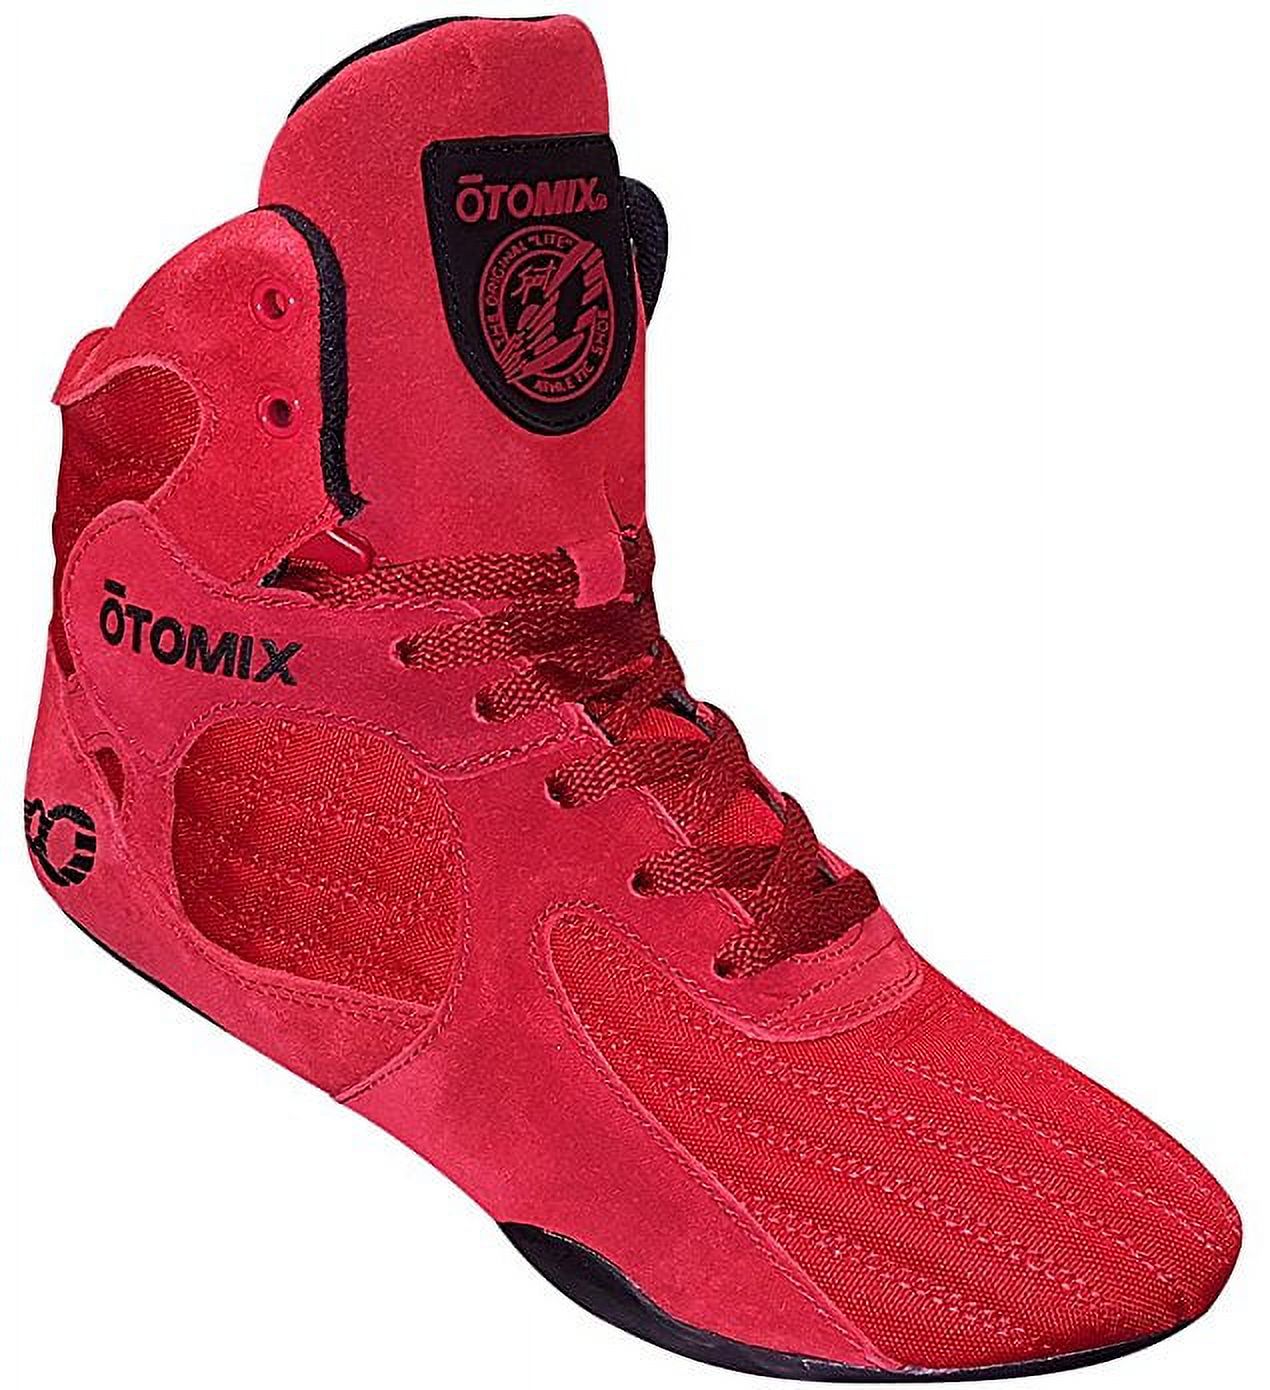 Otomix Red Stingray Escape Weightlifting & Grappling Shoe (Size 7.5) - image 1 of 5